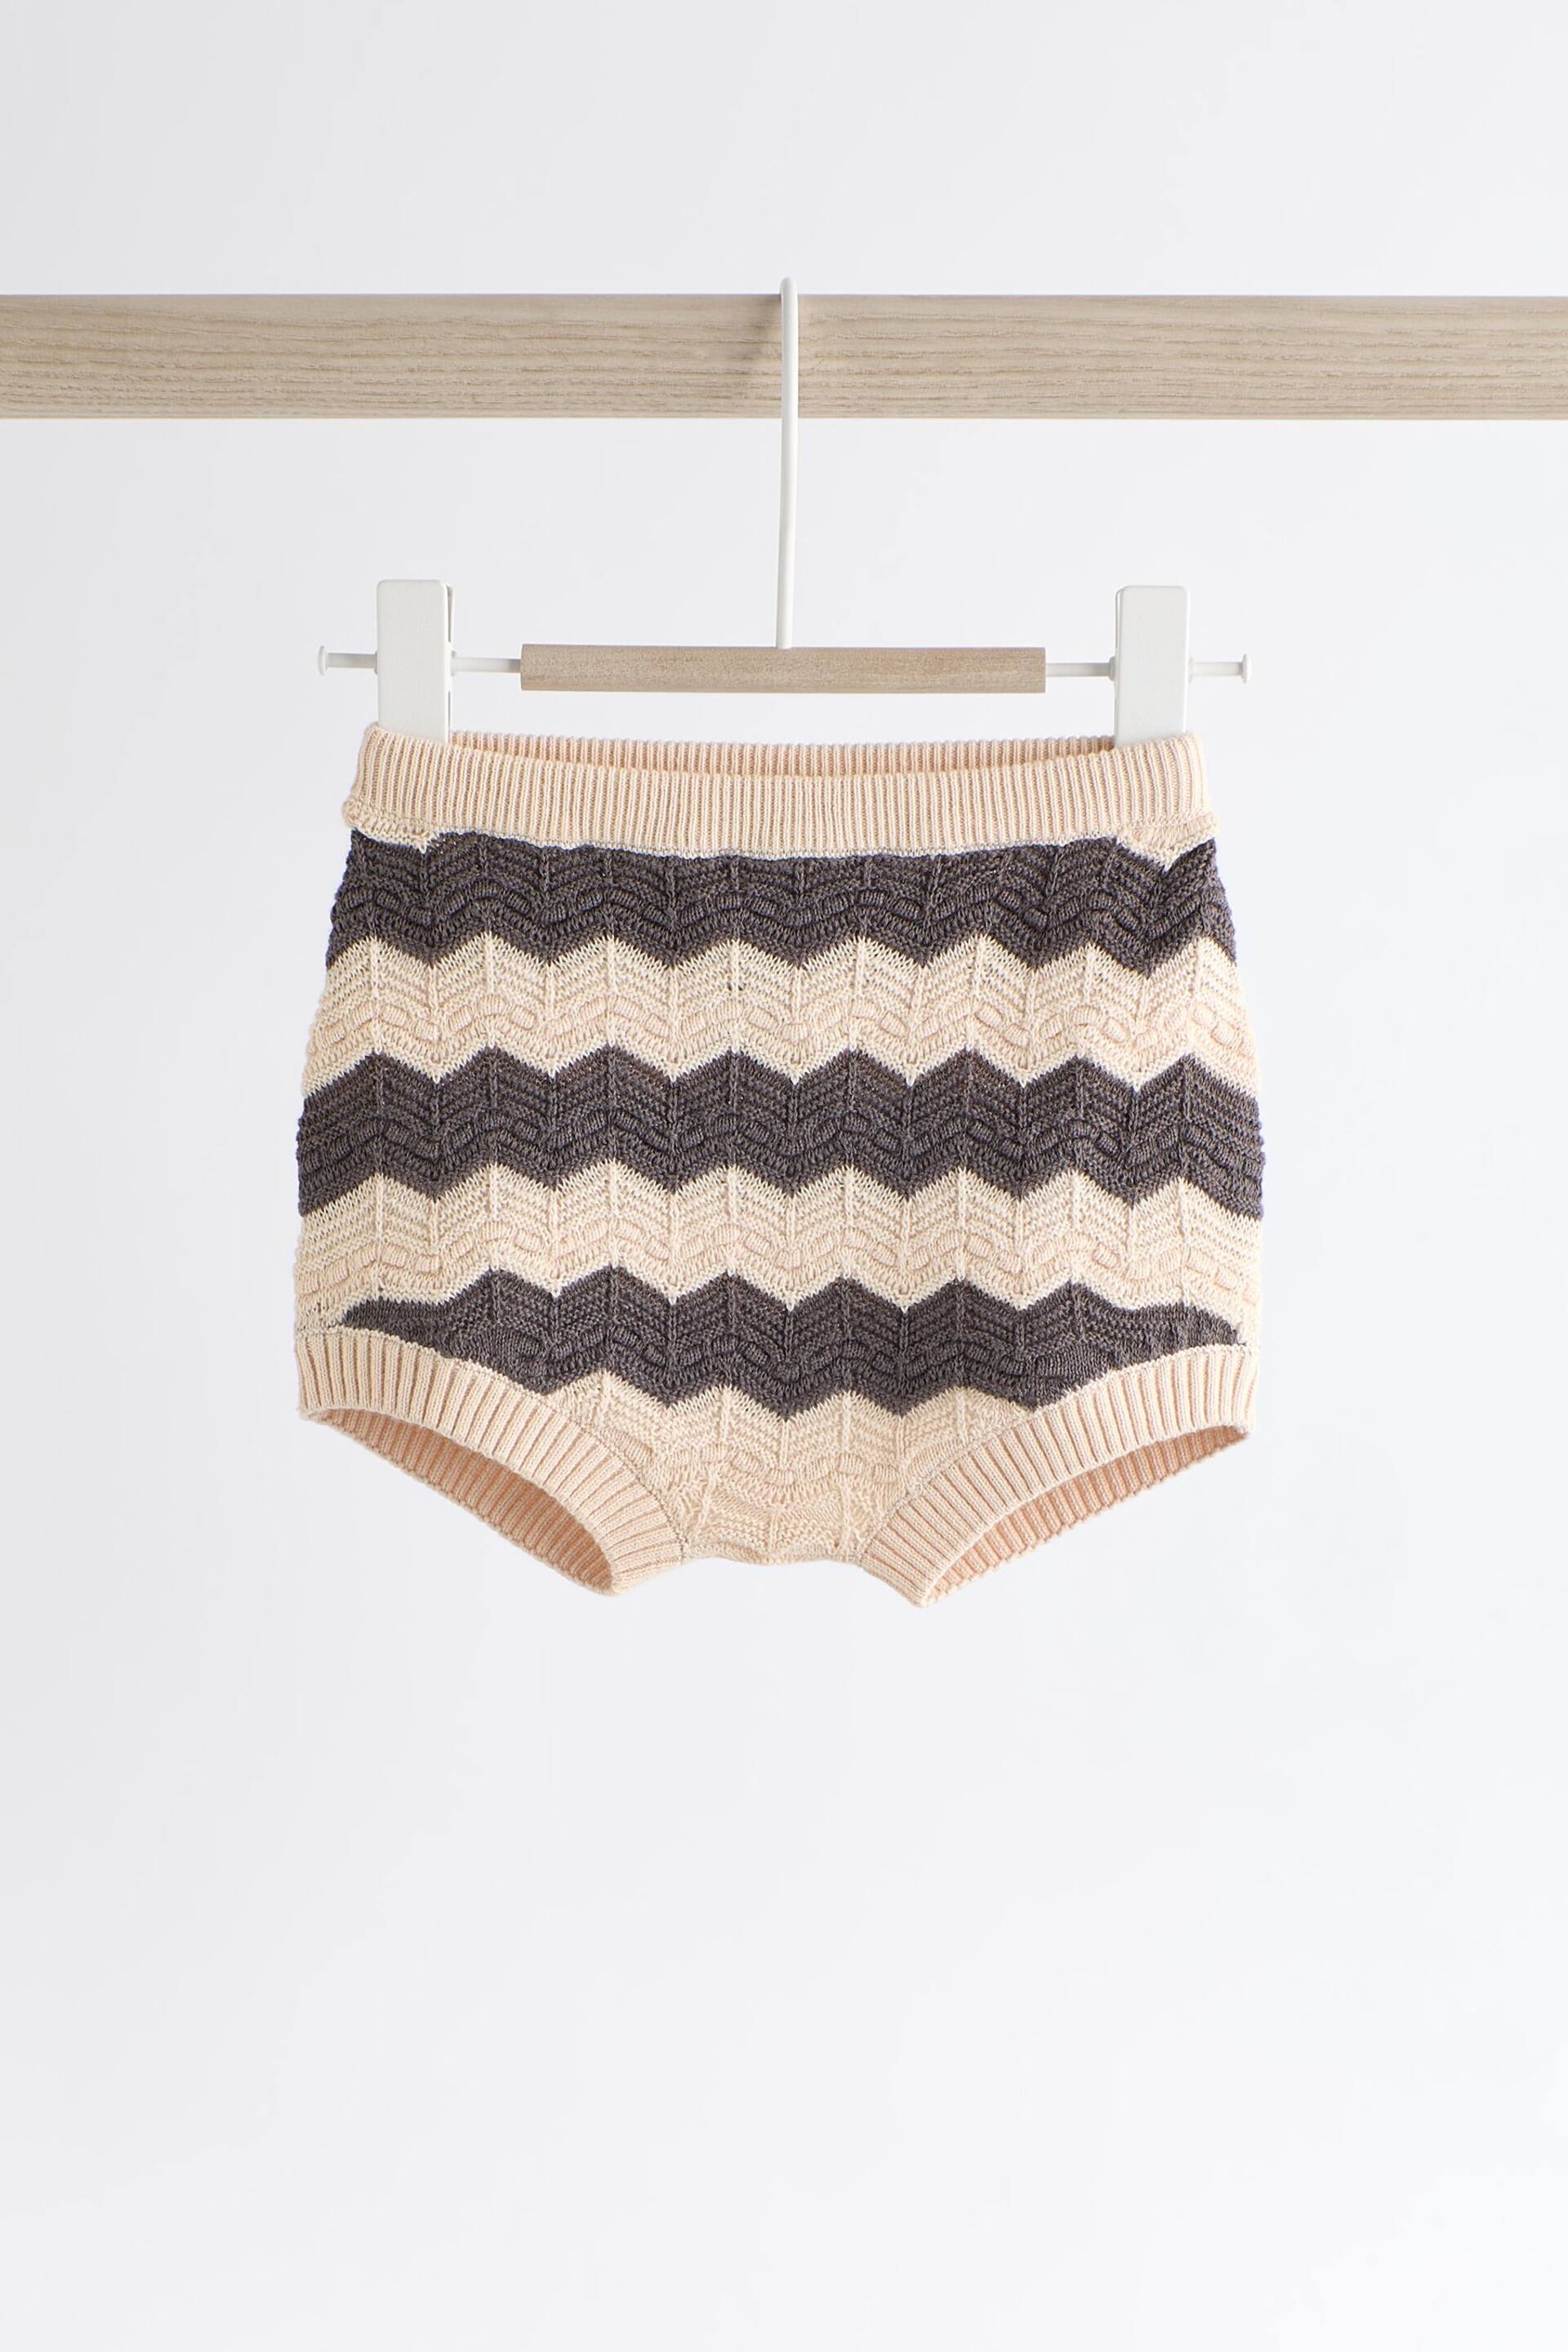 Tan/ Monochrome Zig Zag Stripe Baby Knitted Crochet Top And Shorts Set (0mths-2yrs) - Image 4 of 9